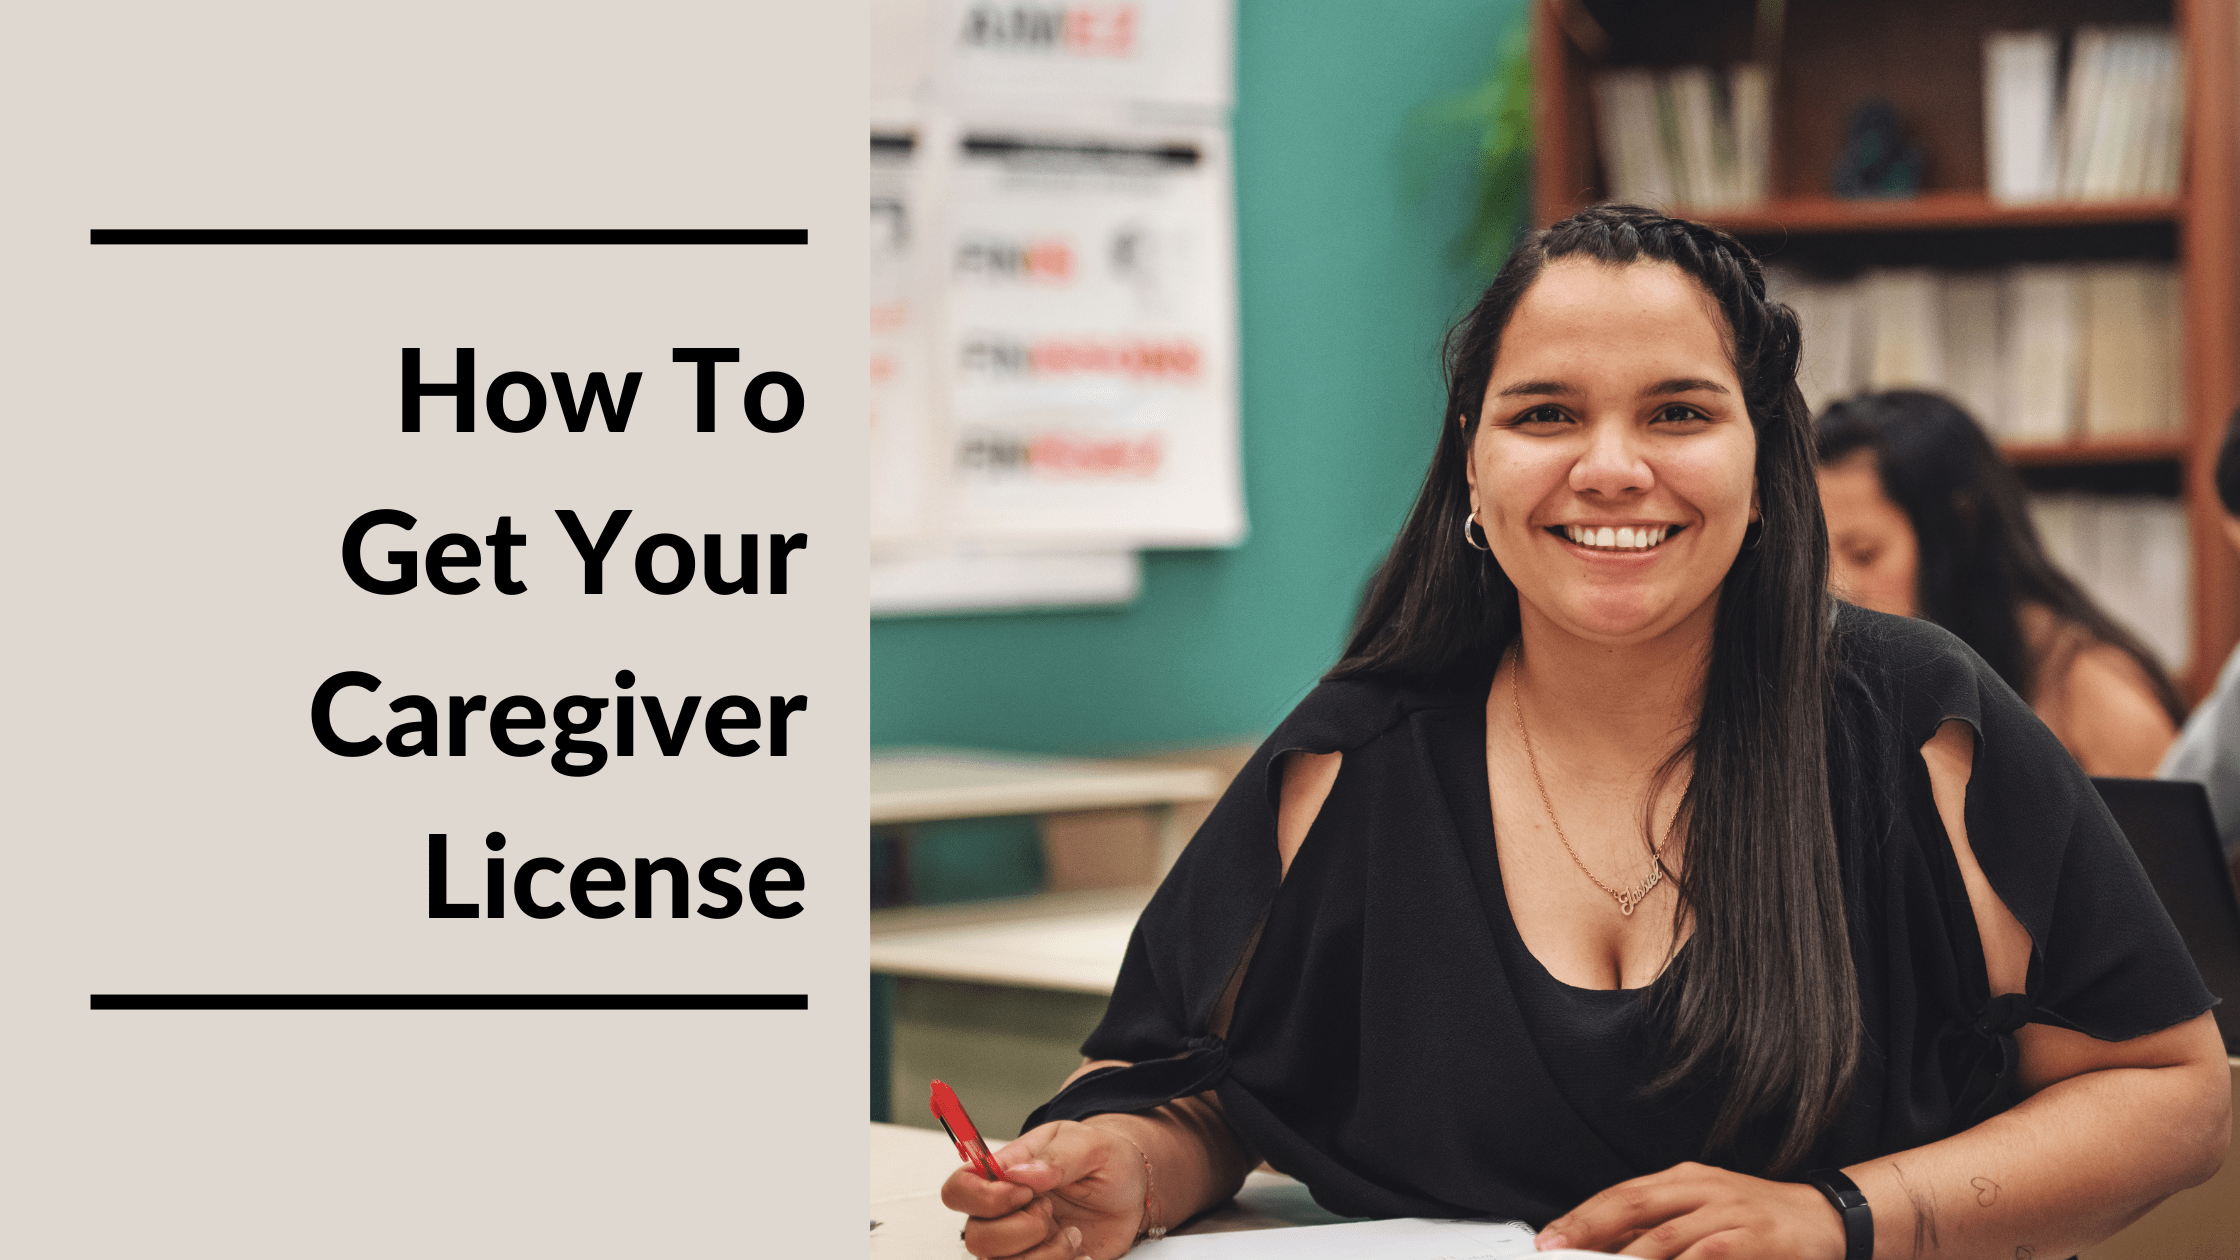 How To Get Your Caregiver License Featured Image